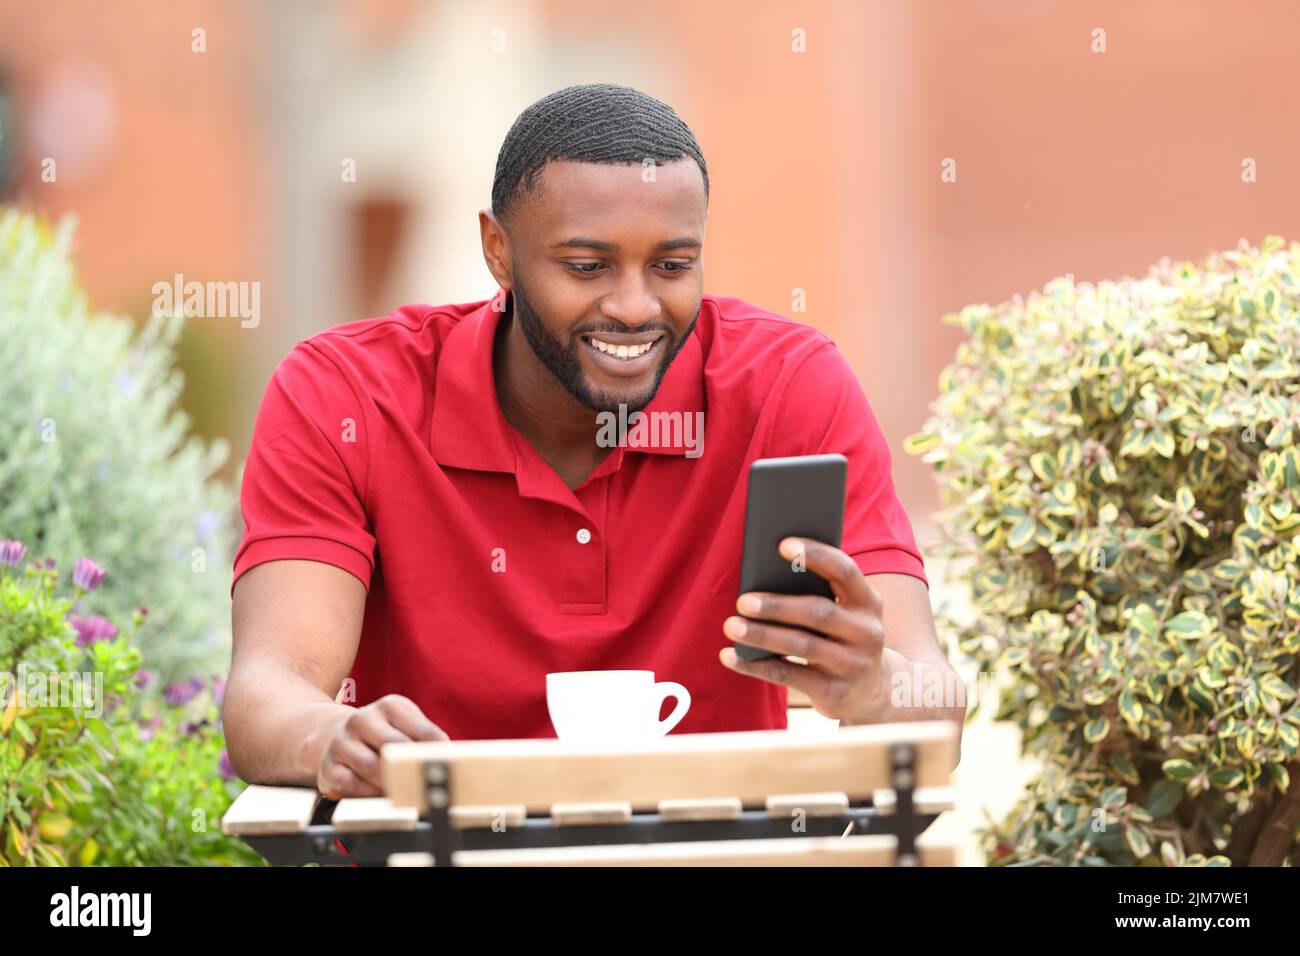 Happy man in red using smart phone sitting in a coffee shop terrace Stock Photo